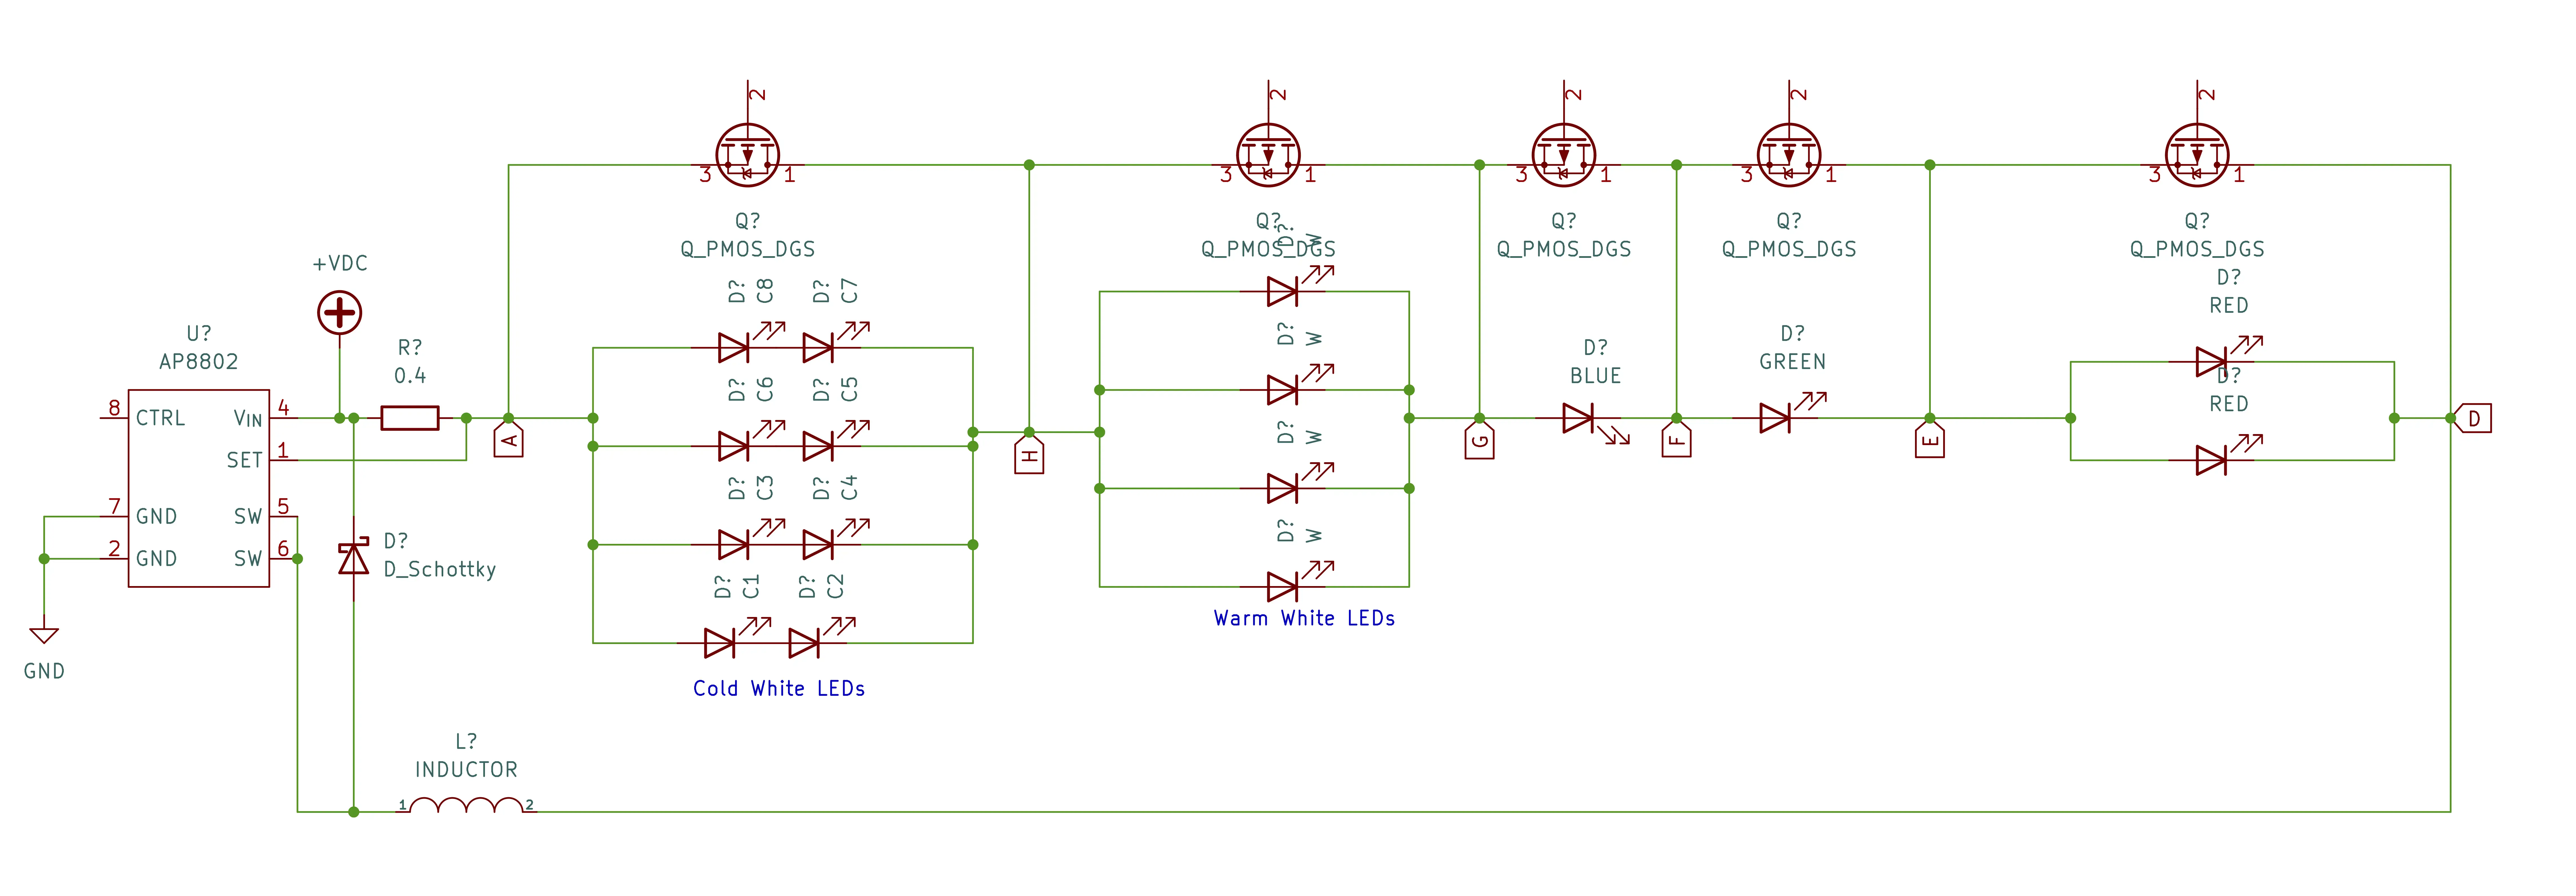 LED Schematic Improved